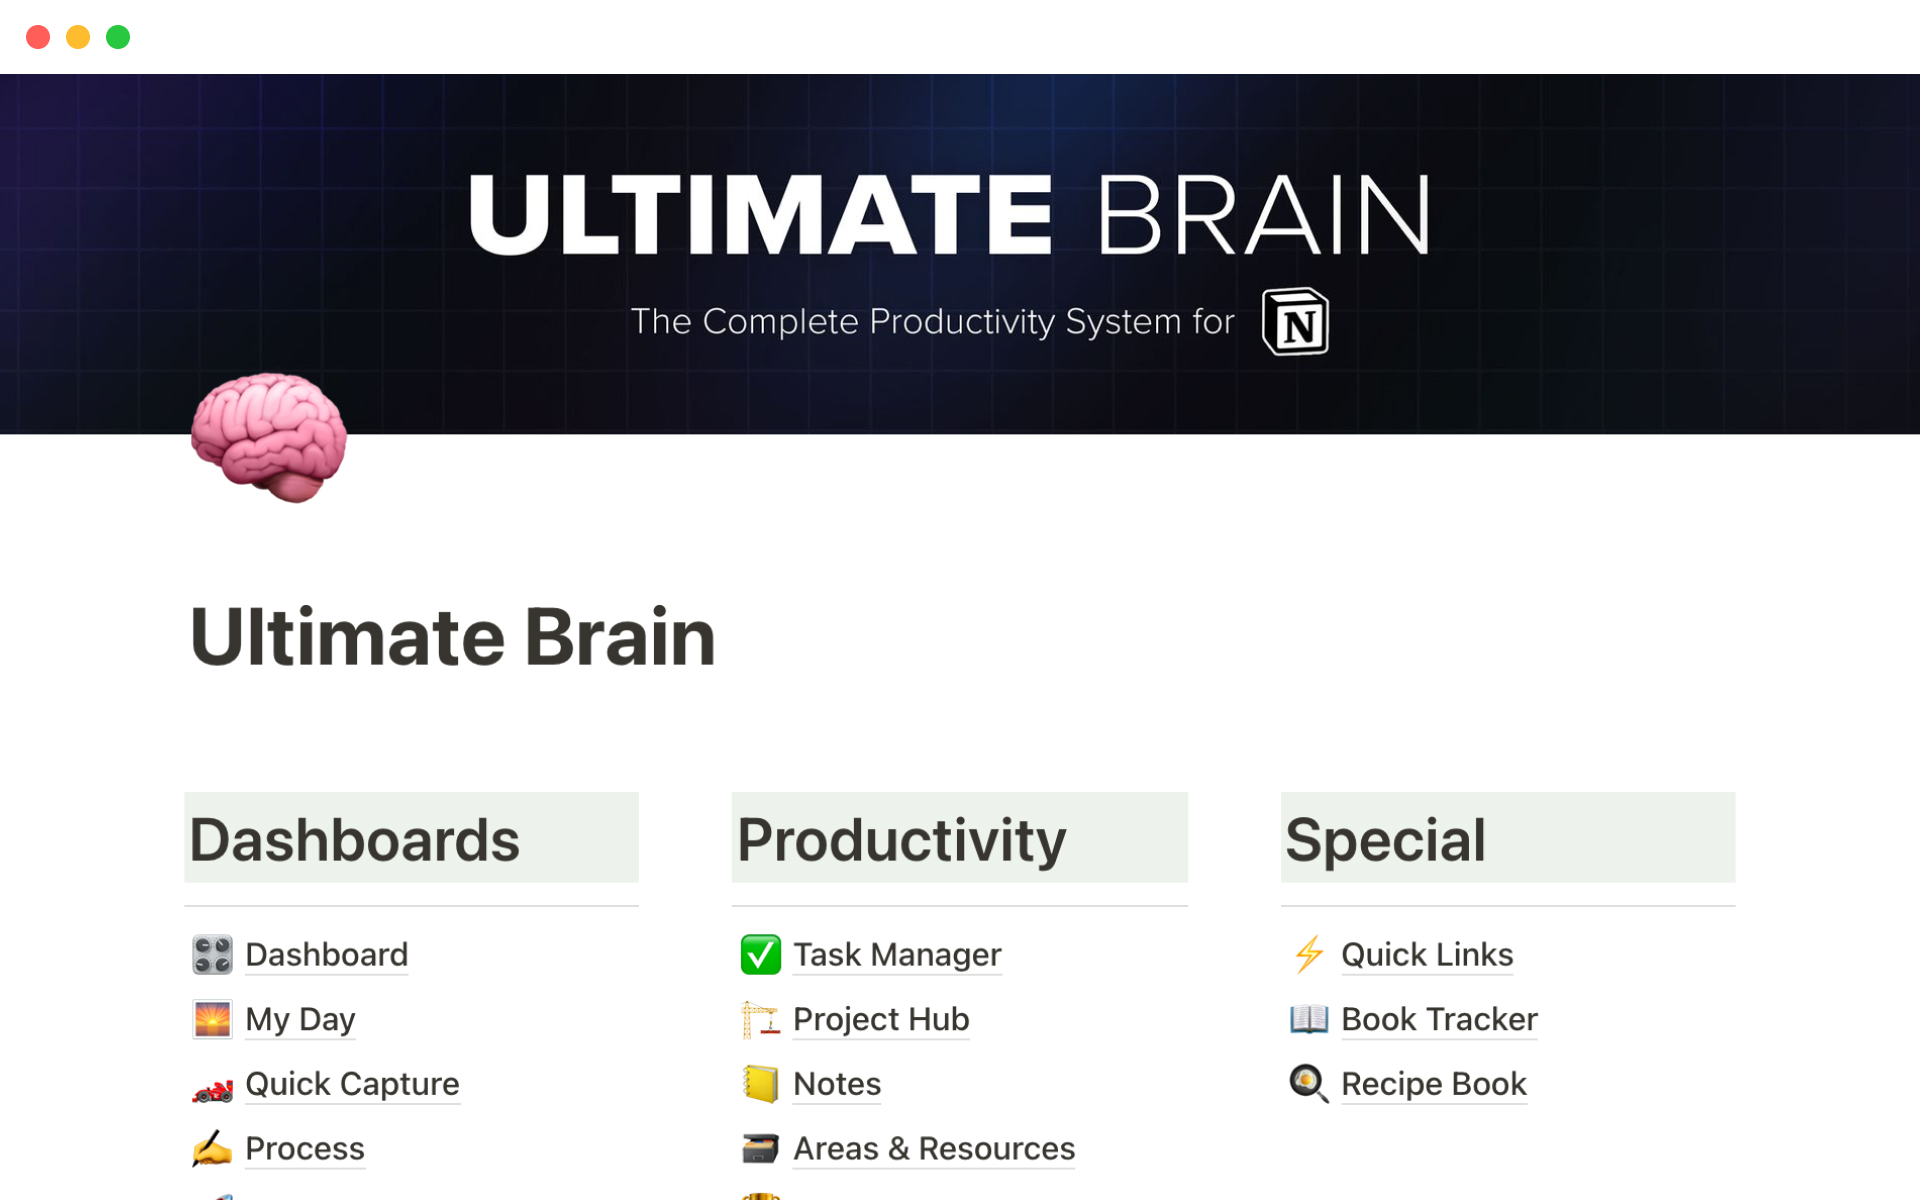 notion-template-gallery-ultimate-brain